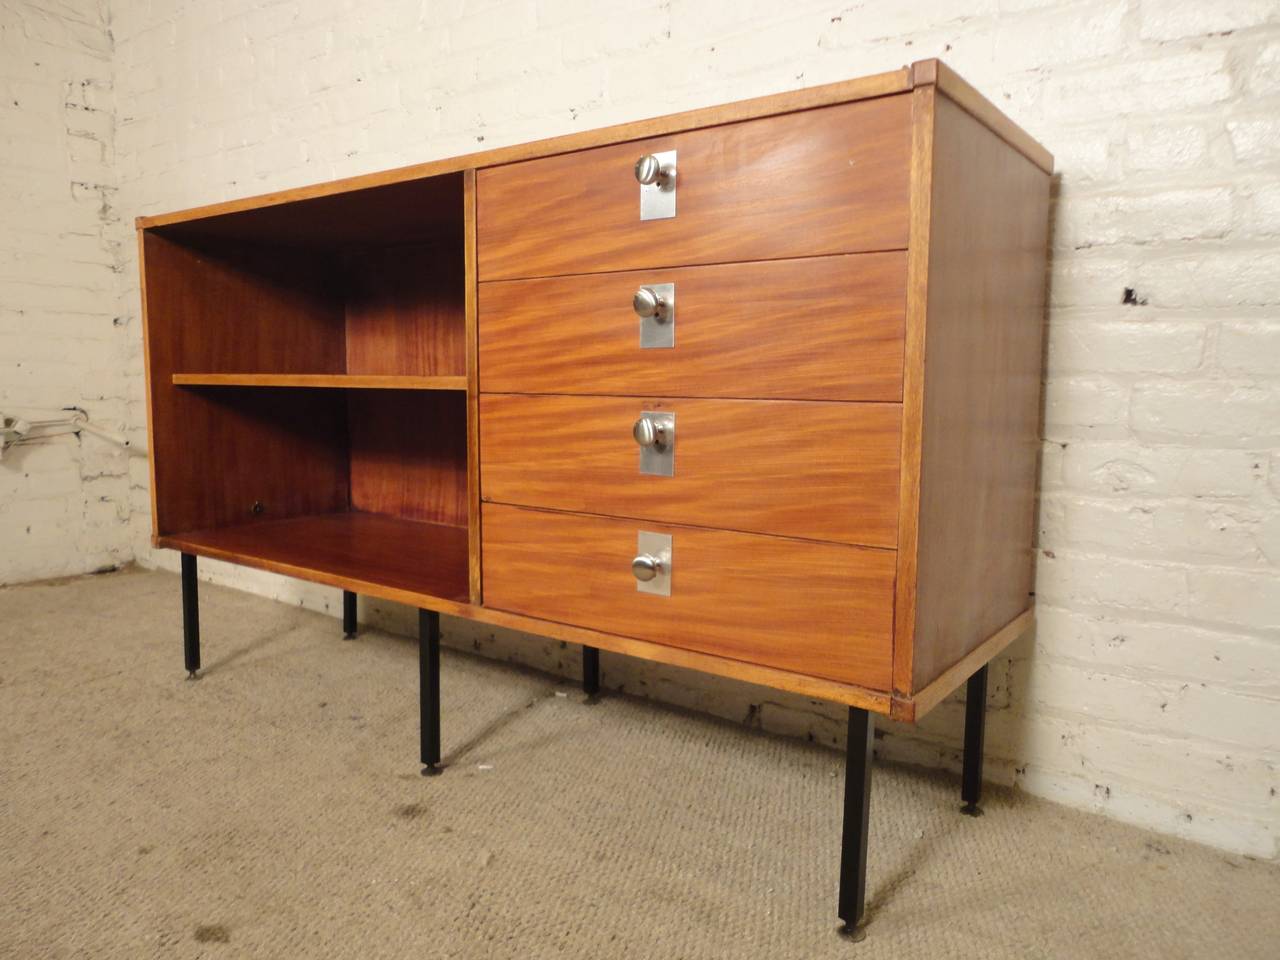 Unusual vintage cabinet in the manner of George Nelson for Herman Miller. Features stunning wood grain drawers with accenting polished chrome hardware, open cabinet with shelf, set on sleek black legs. Great for home or office use.

(Please